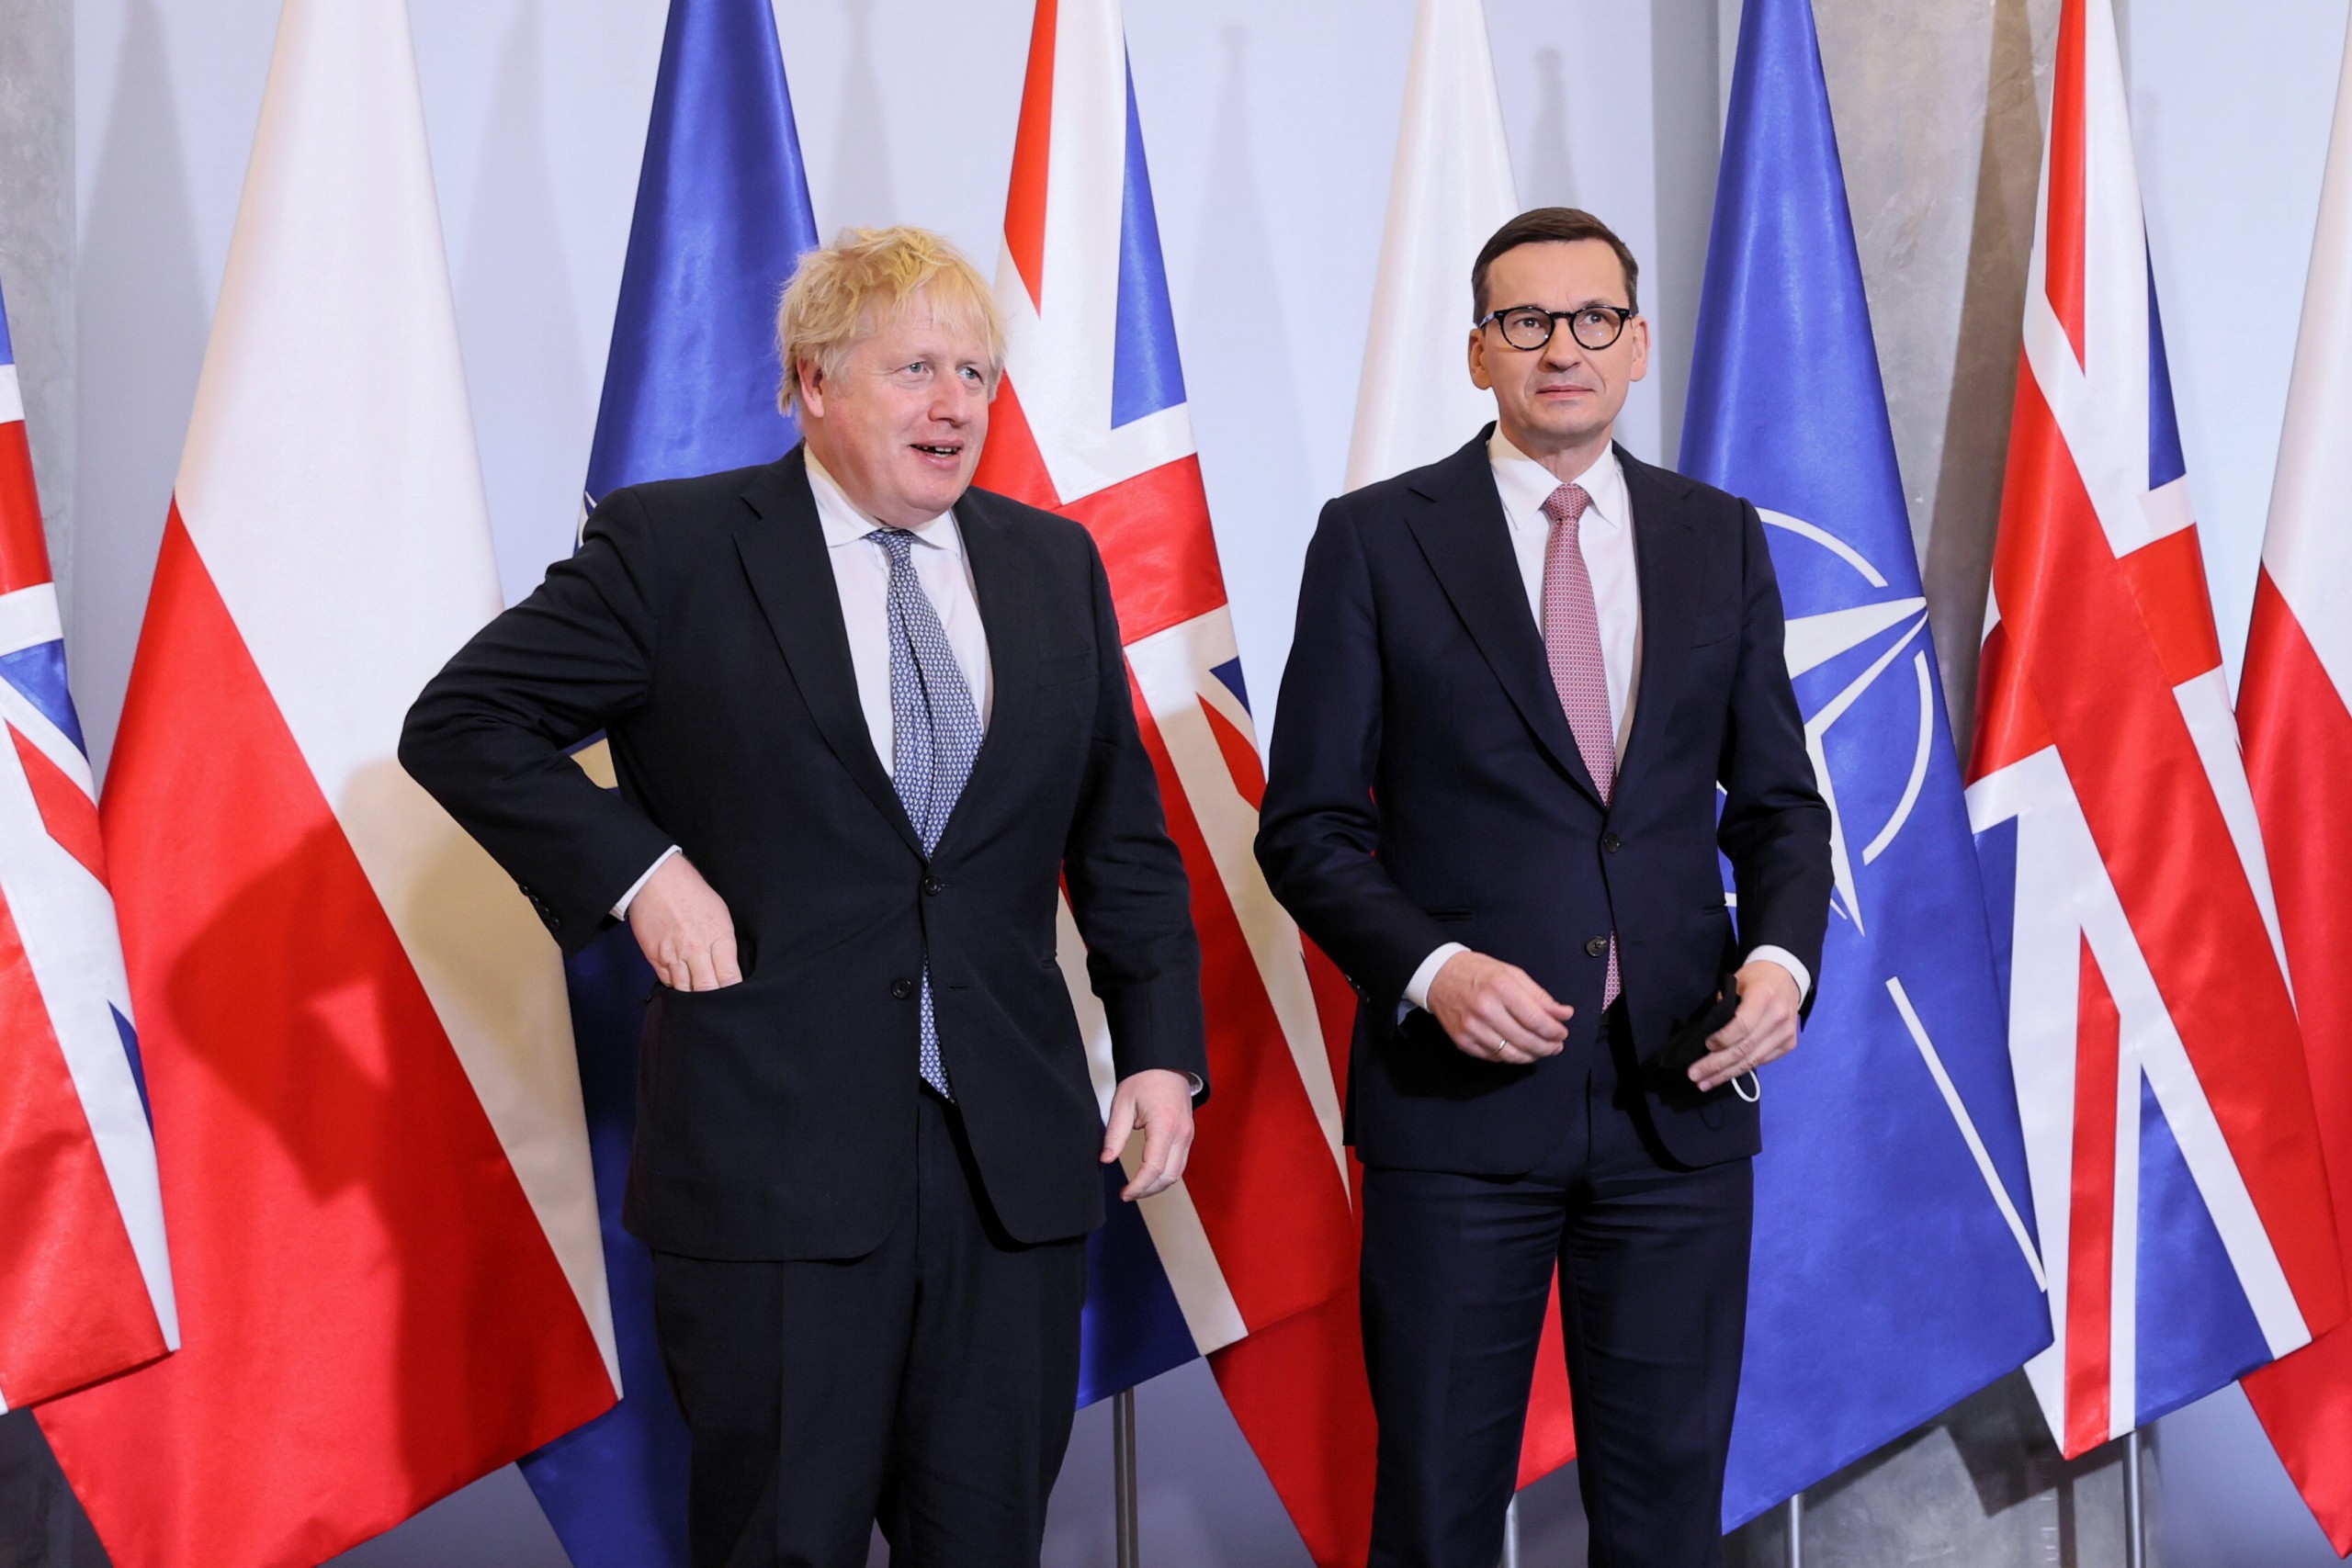 epa09744195 Polish Prime Minister Mateusz Morawiecki (R) and British Prime Minister Boris Johnson (L) during an official welcome ceremony before their meeting at the at the Chancellery of the Prime Minister in Warsaw, Poland, 10 February 2022. Johnson is visiting Poland amid tensions over the security situation in Ukraine.  EPA/LESZEK SZYMANSKI POLAND OUT